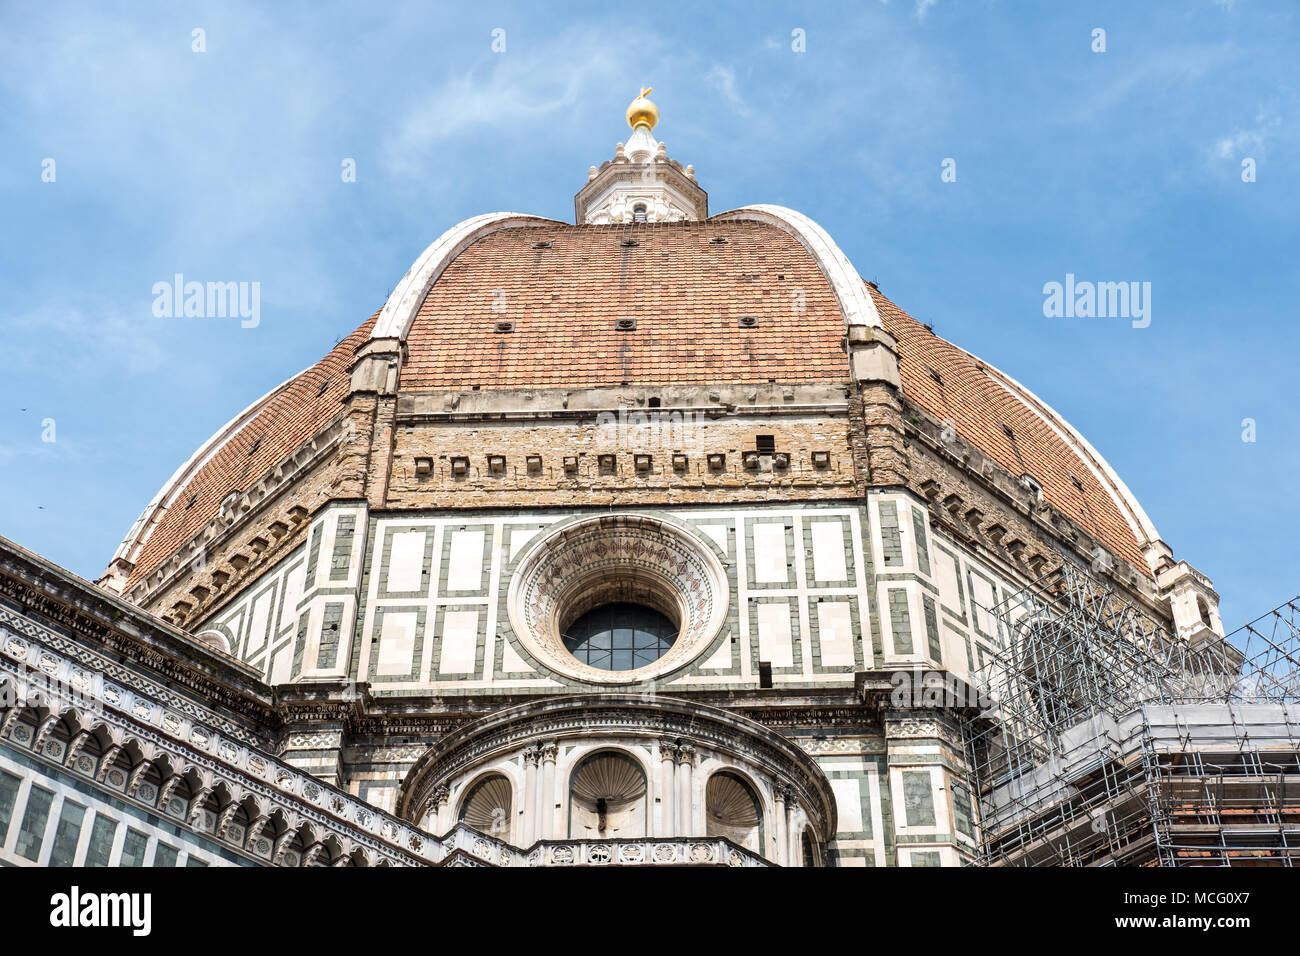 Detail of Florence Duomo Cathedral. Basilica di Santa Maria del Fiore or Basilica of Saint Mary of the Flower in Florence, Italy. Stock Photo